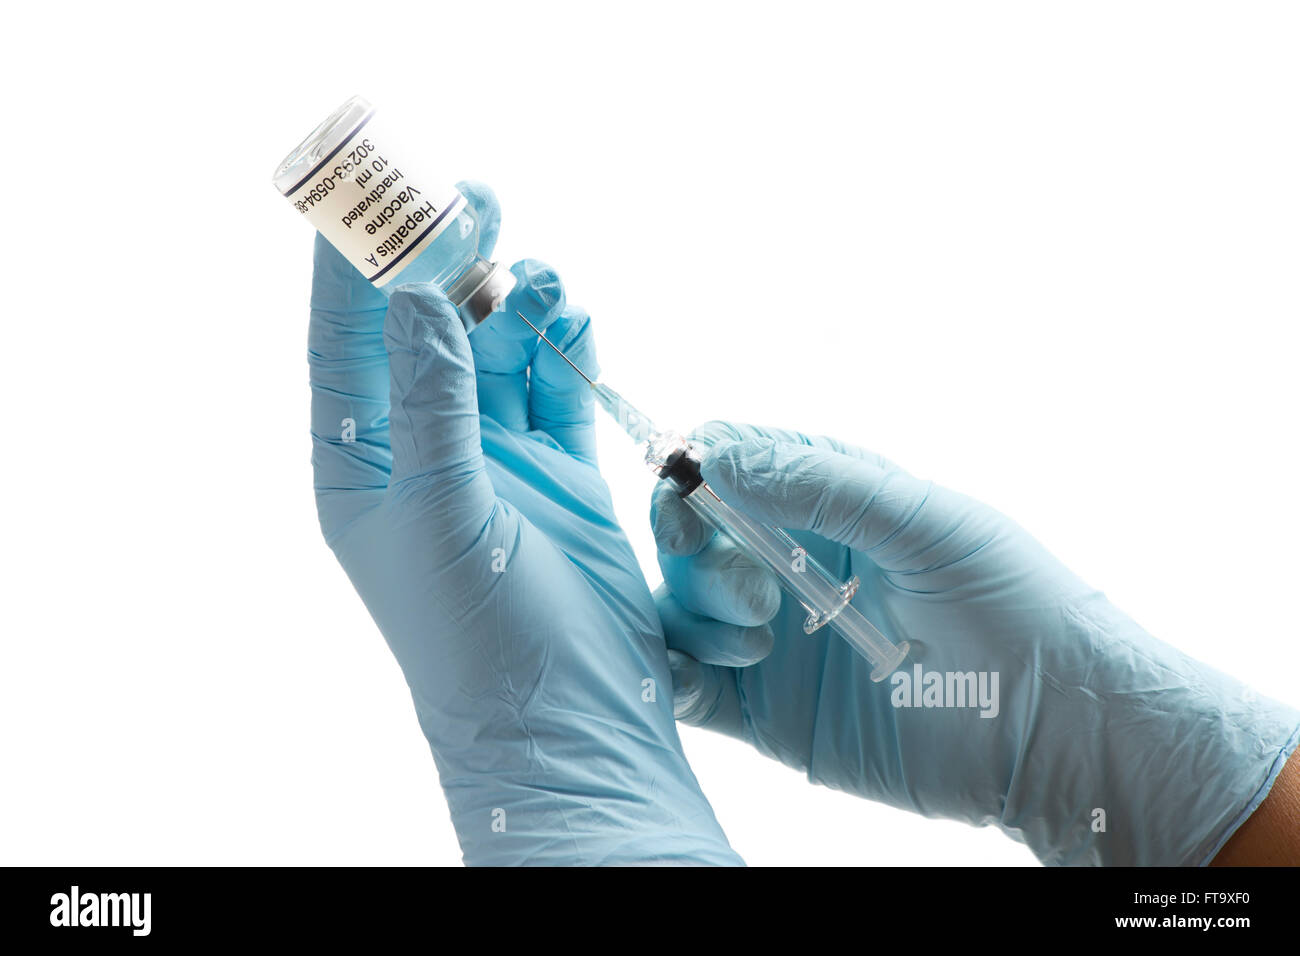 Nurse prepares Hepatitis A vaccine for injection. Label fictitious, created by photographer. Stock Photo